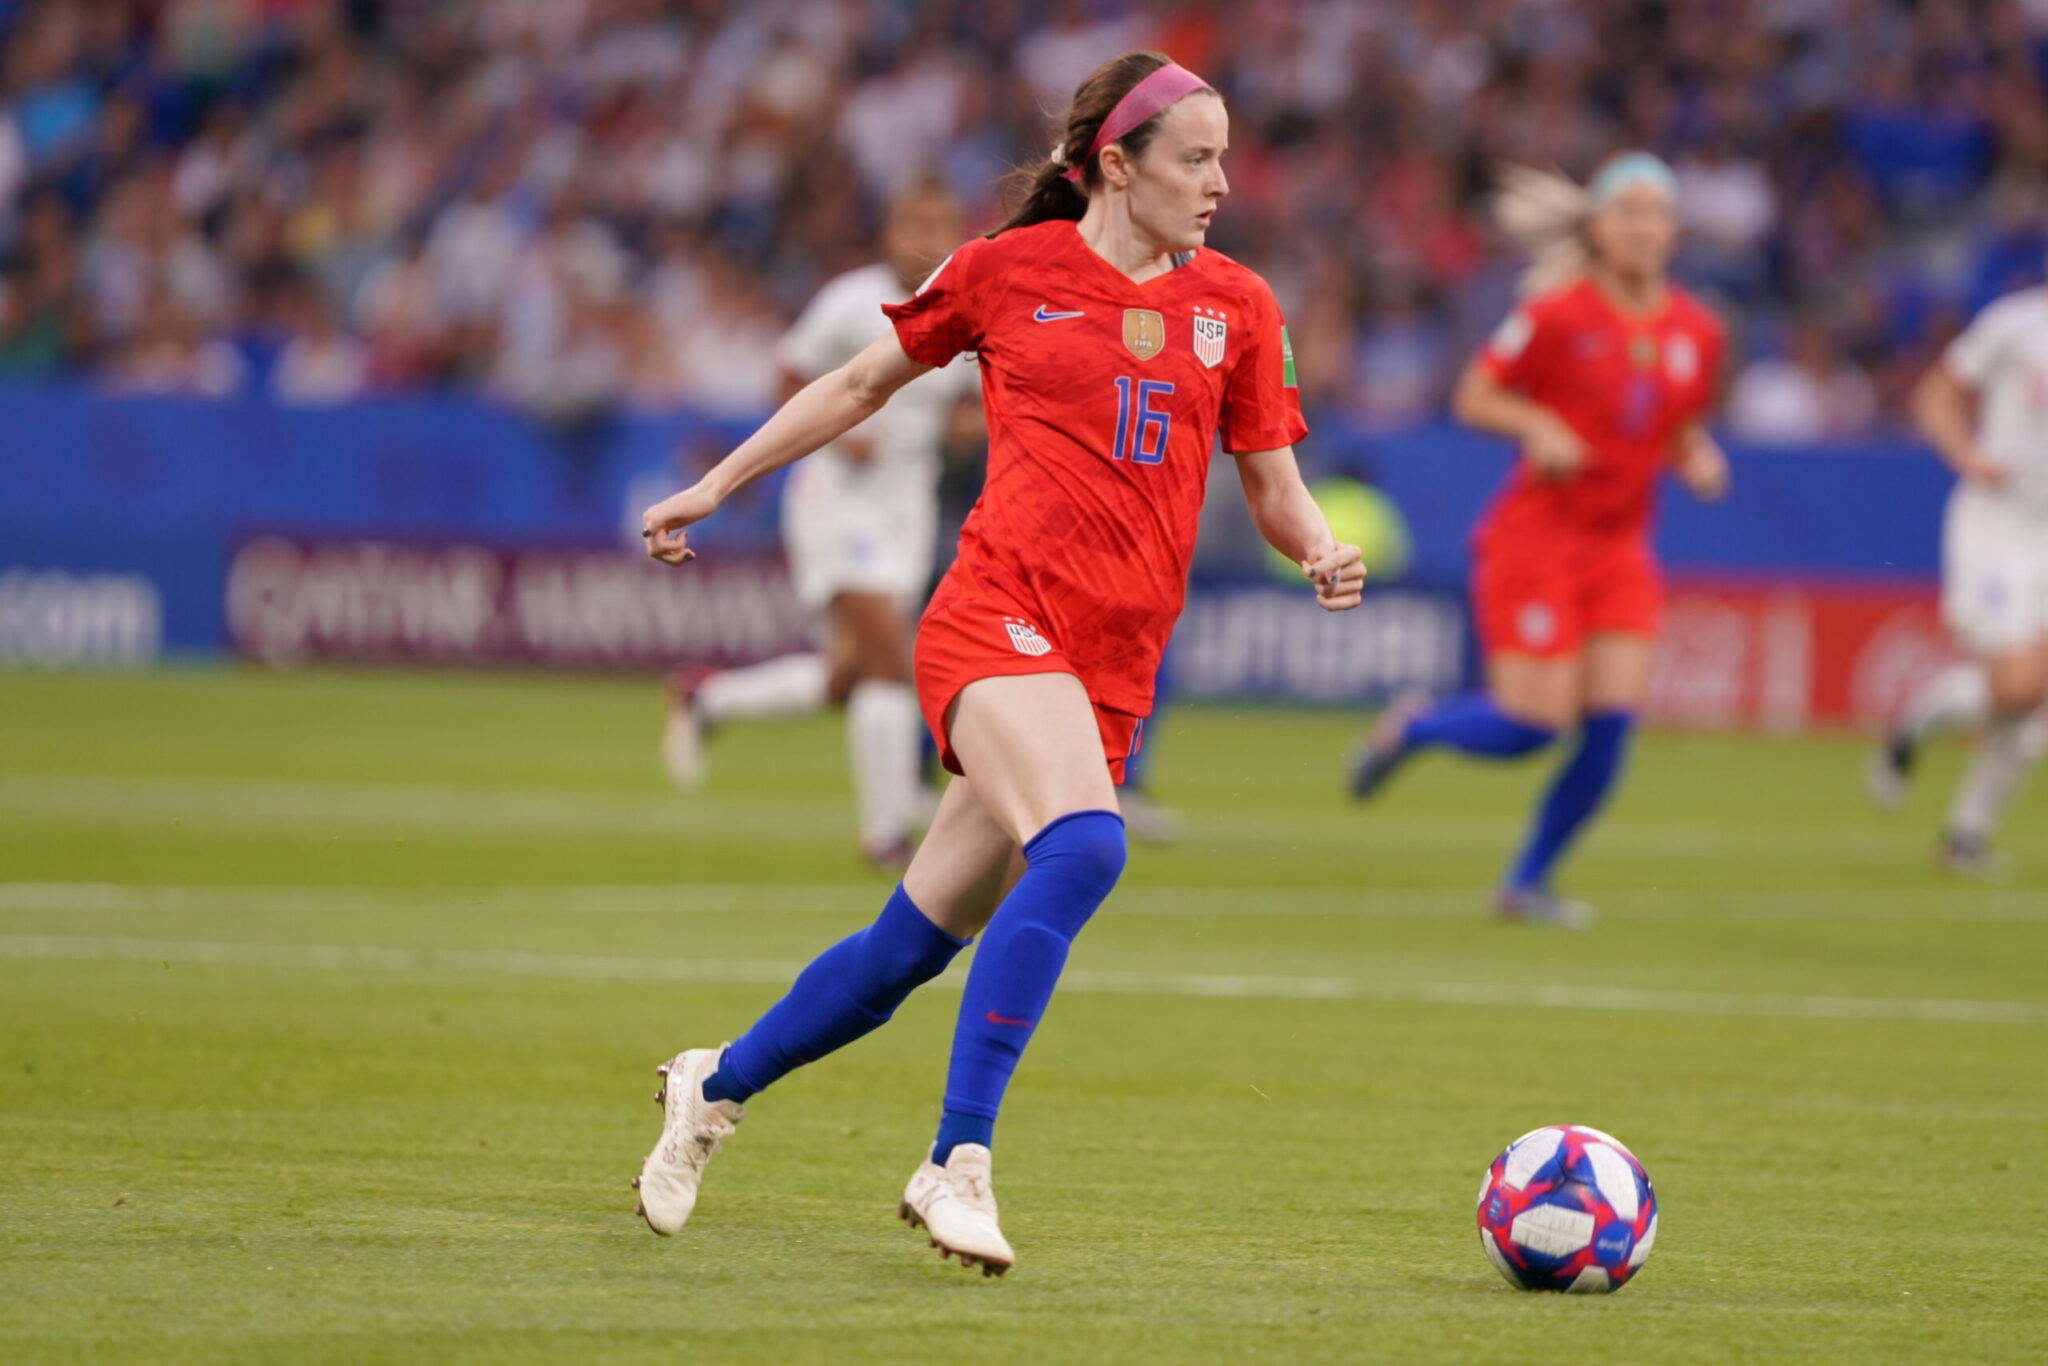 Lavelle, Pugh, USWNT prepare for World Cup Final battle against Netherlands Featured Image